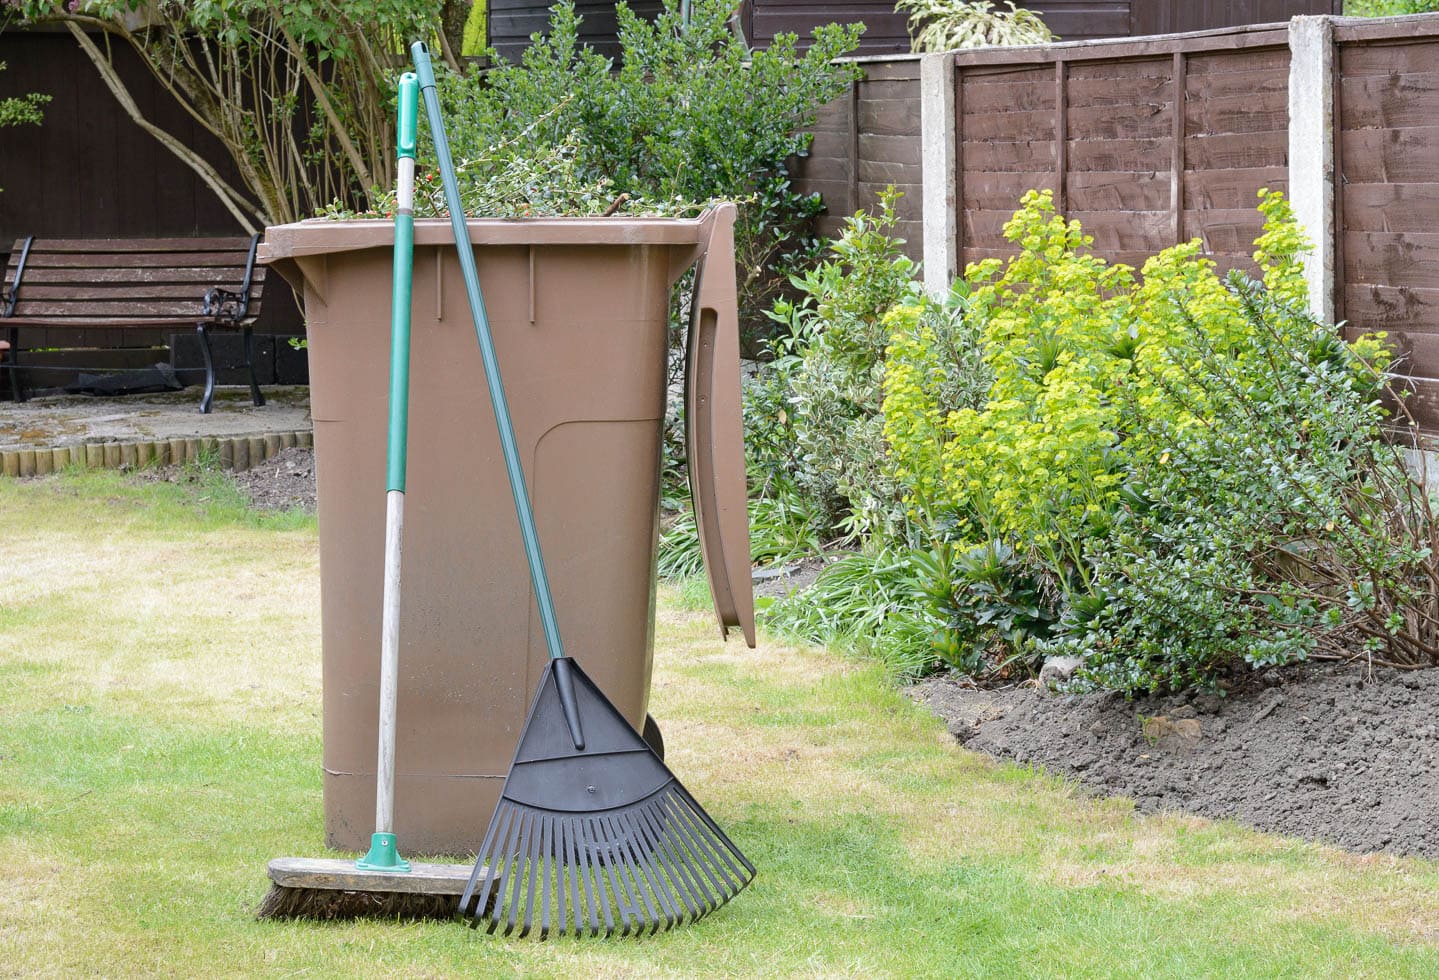 A garbage can with a rake and broom in the garden